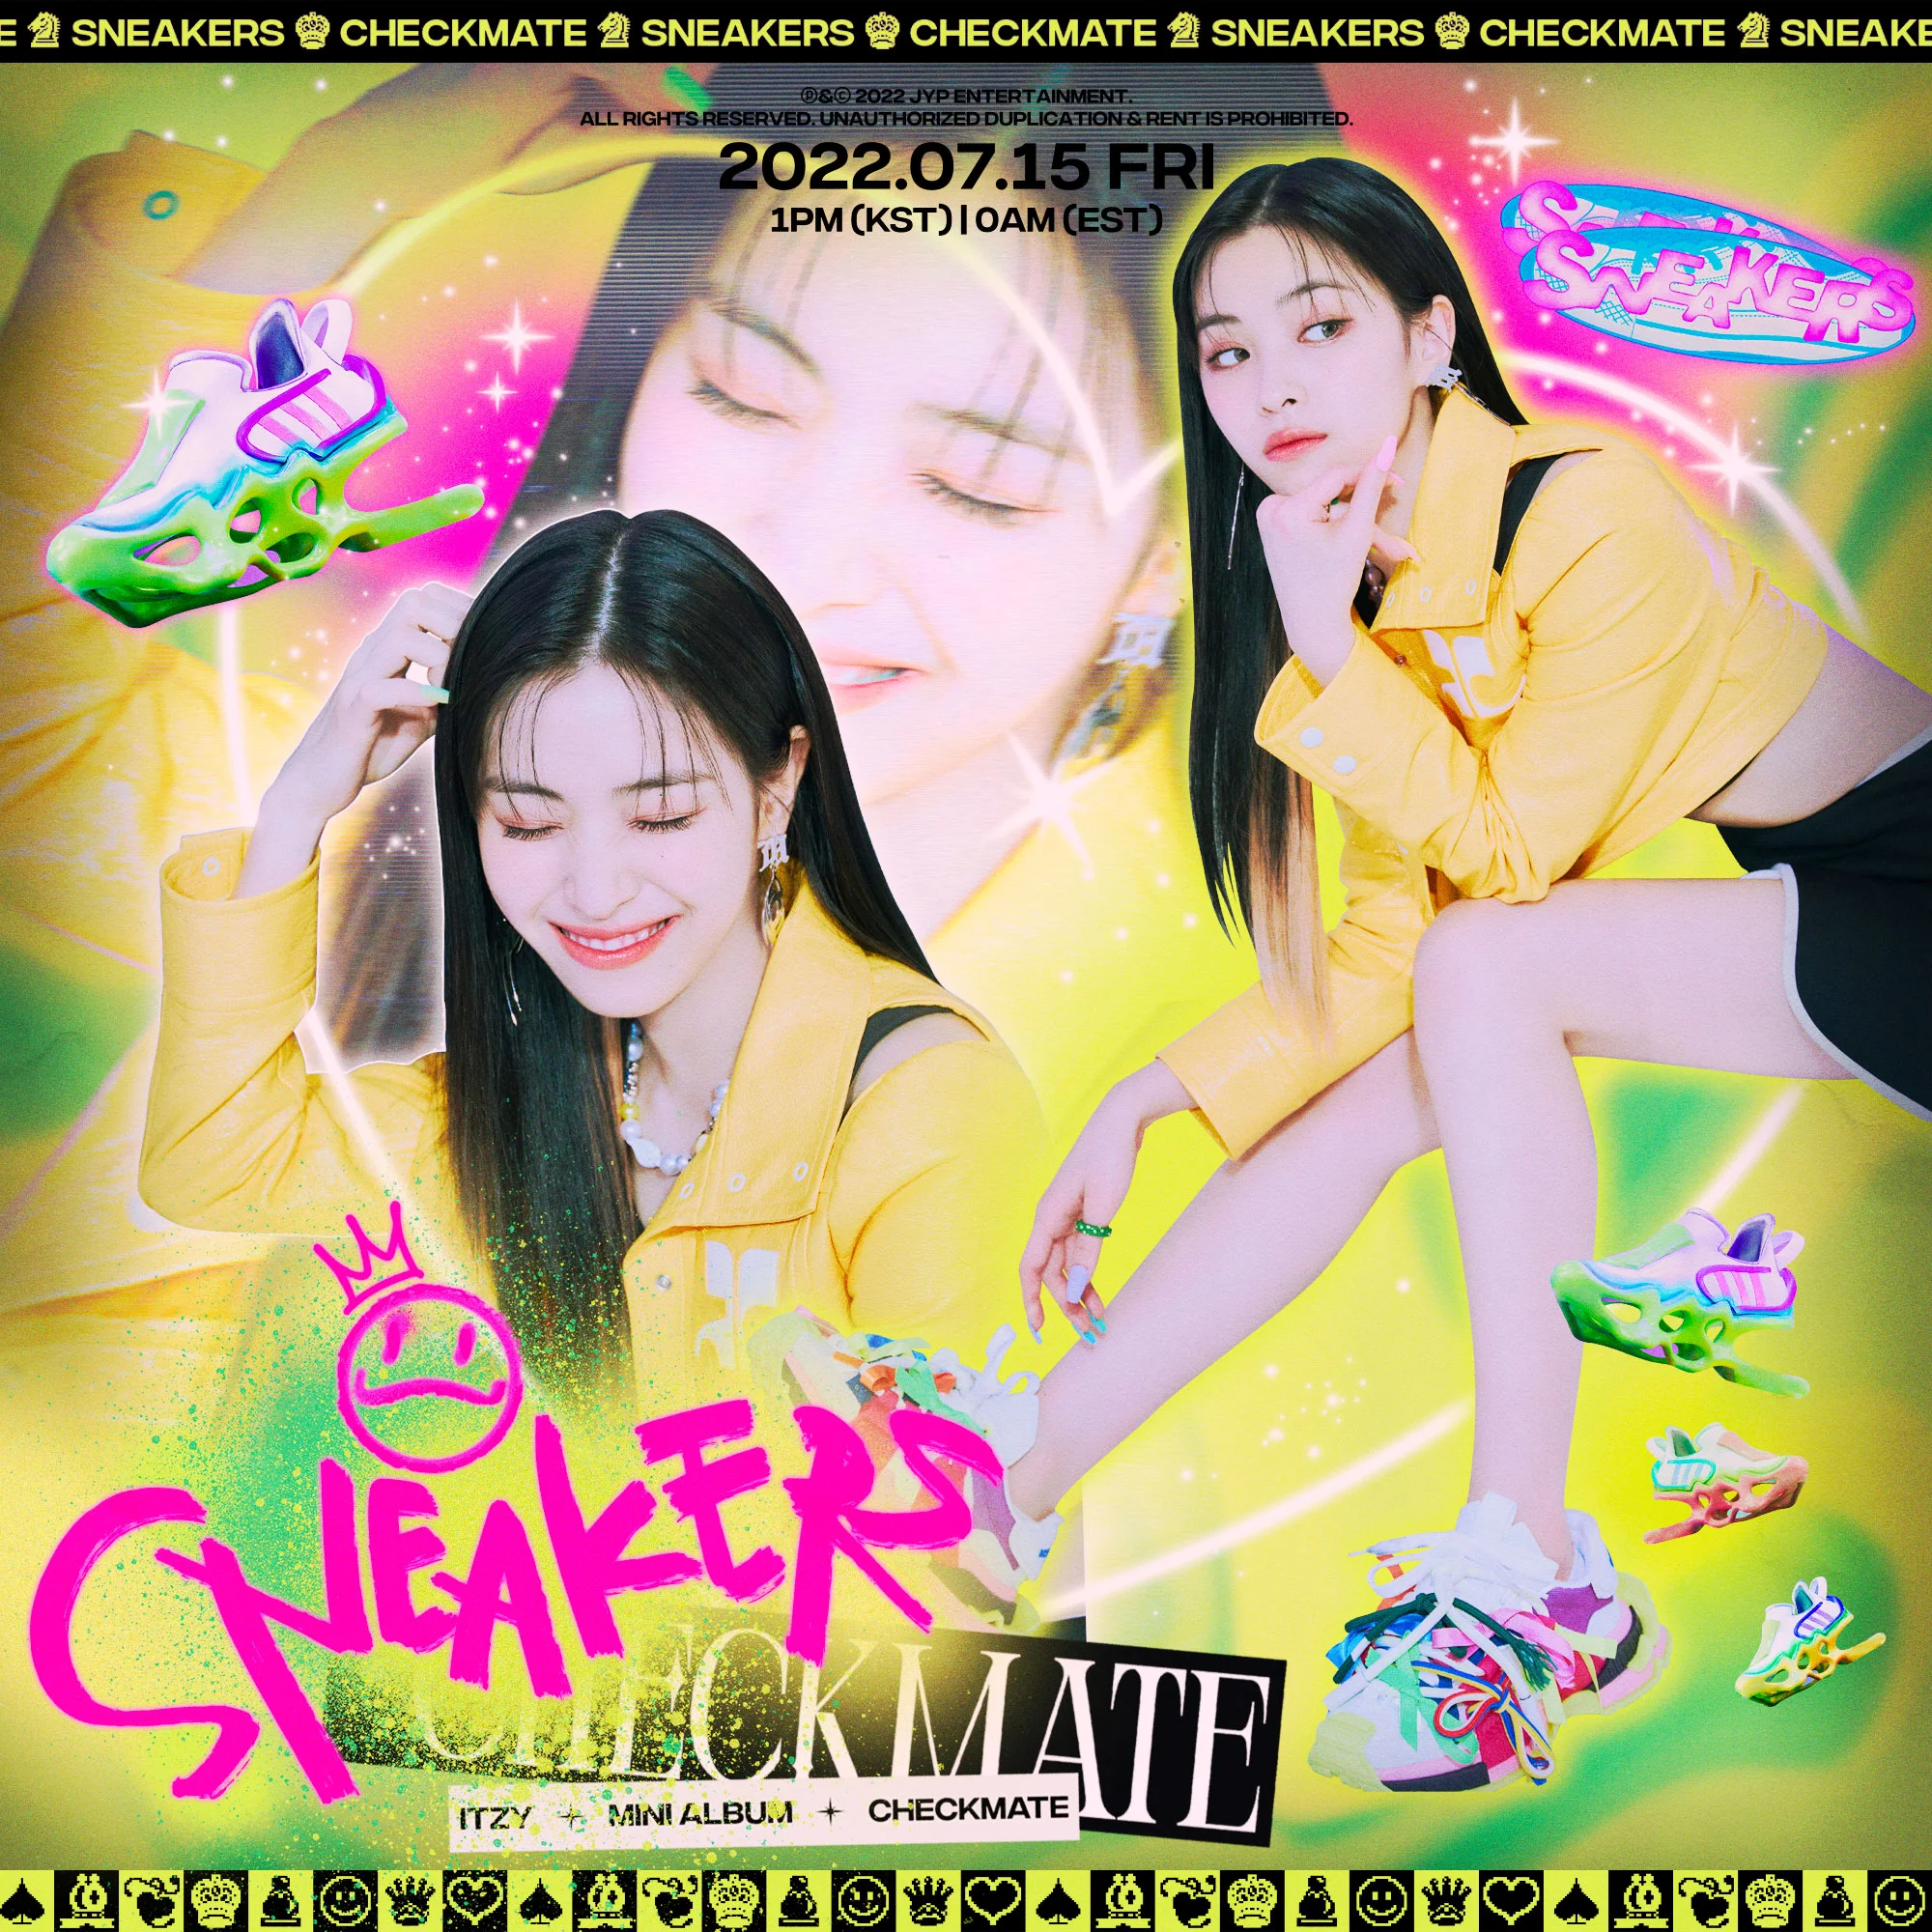 Itzy Checkmate Ryujin Concept Teaser Picture Image Photo Kpop K-Concept 3